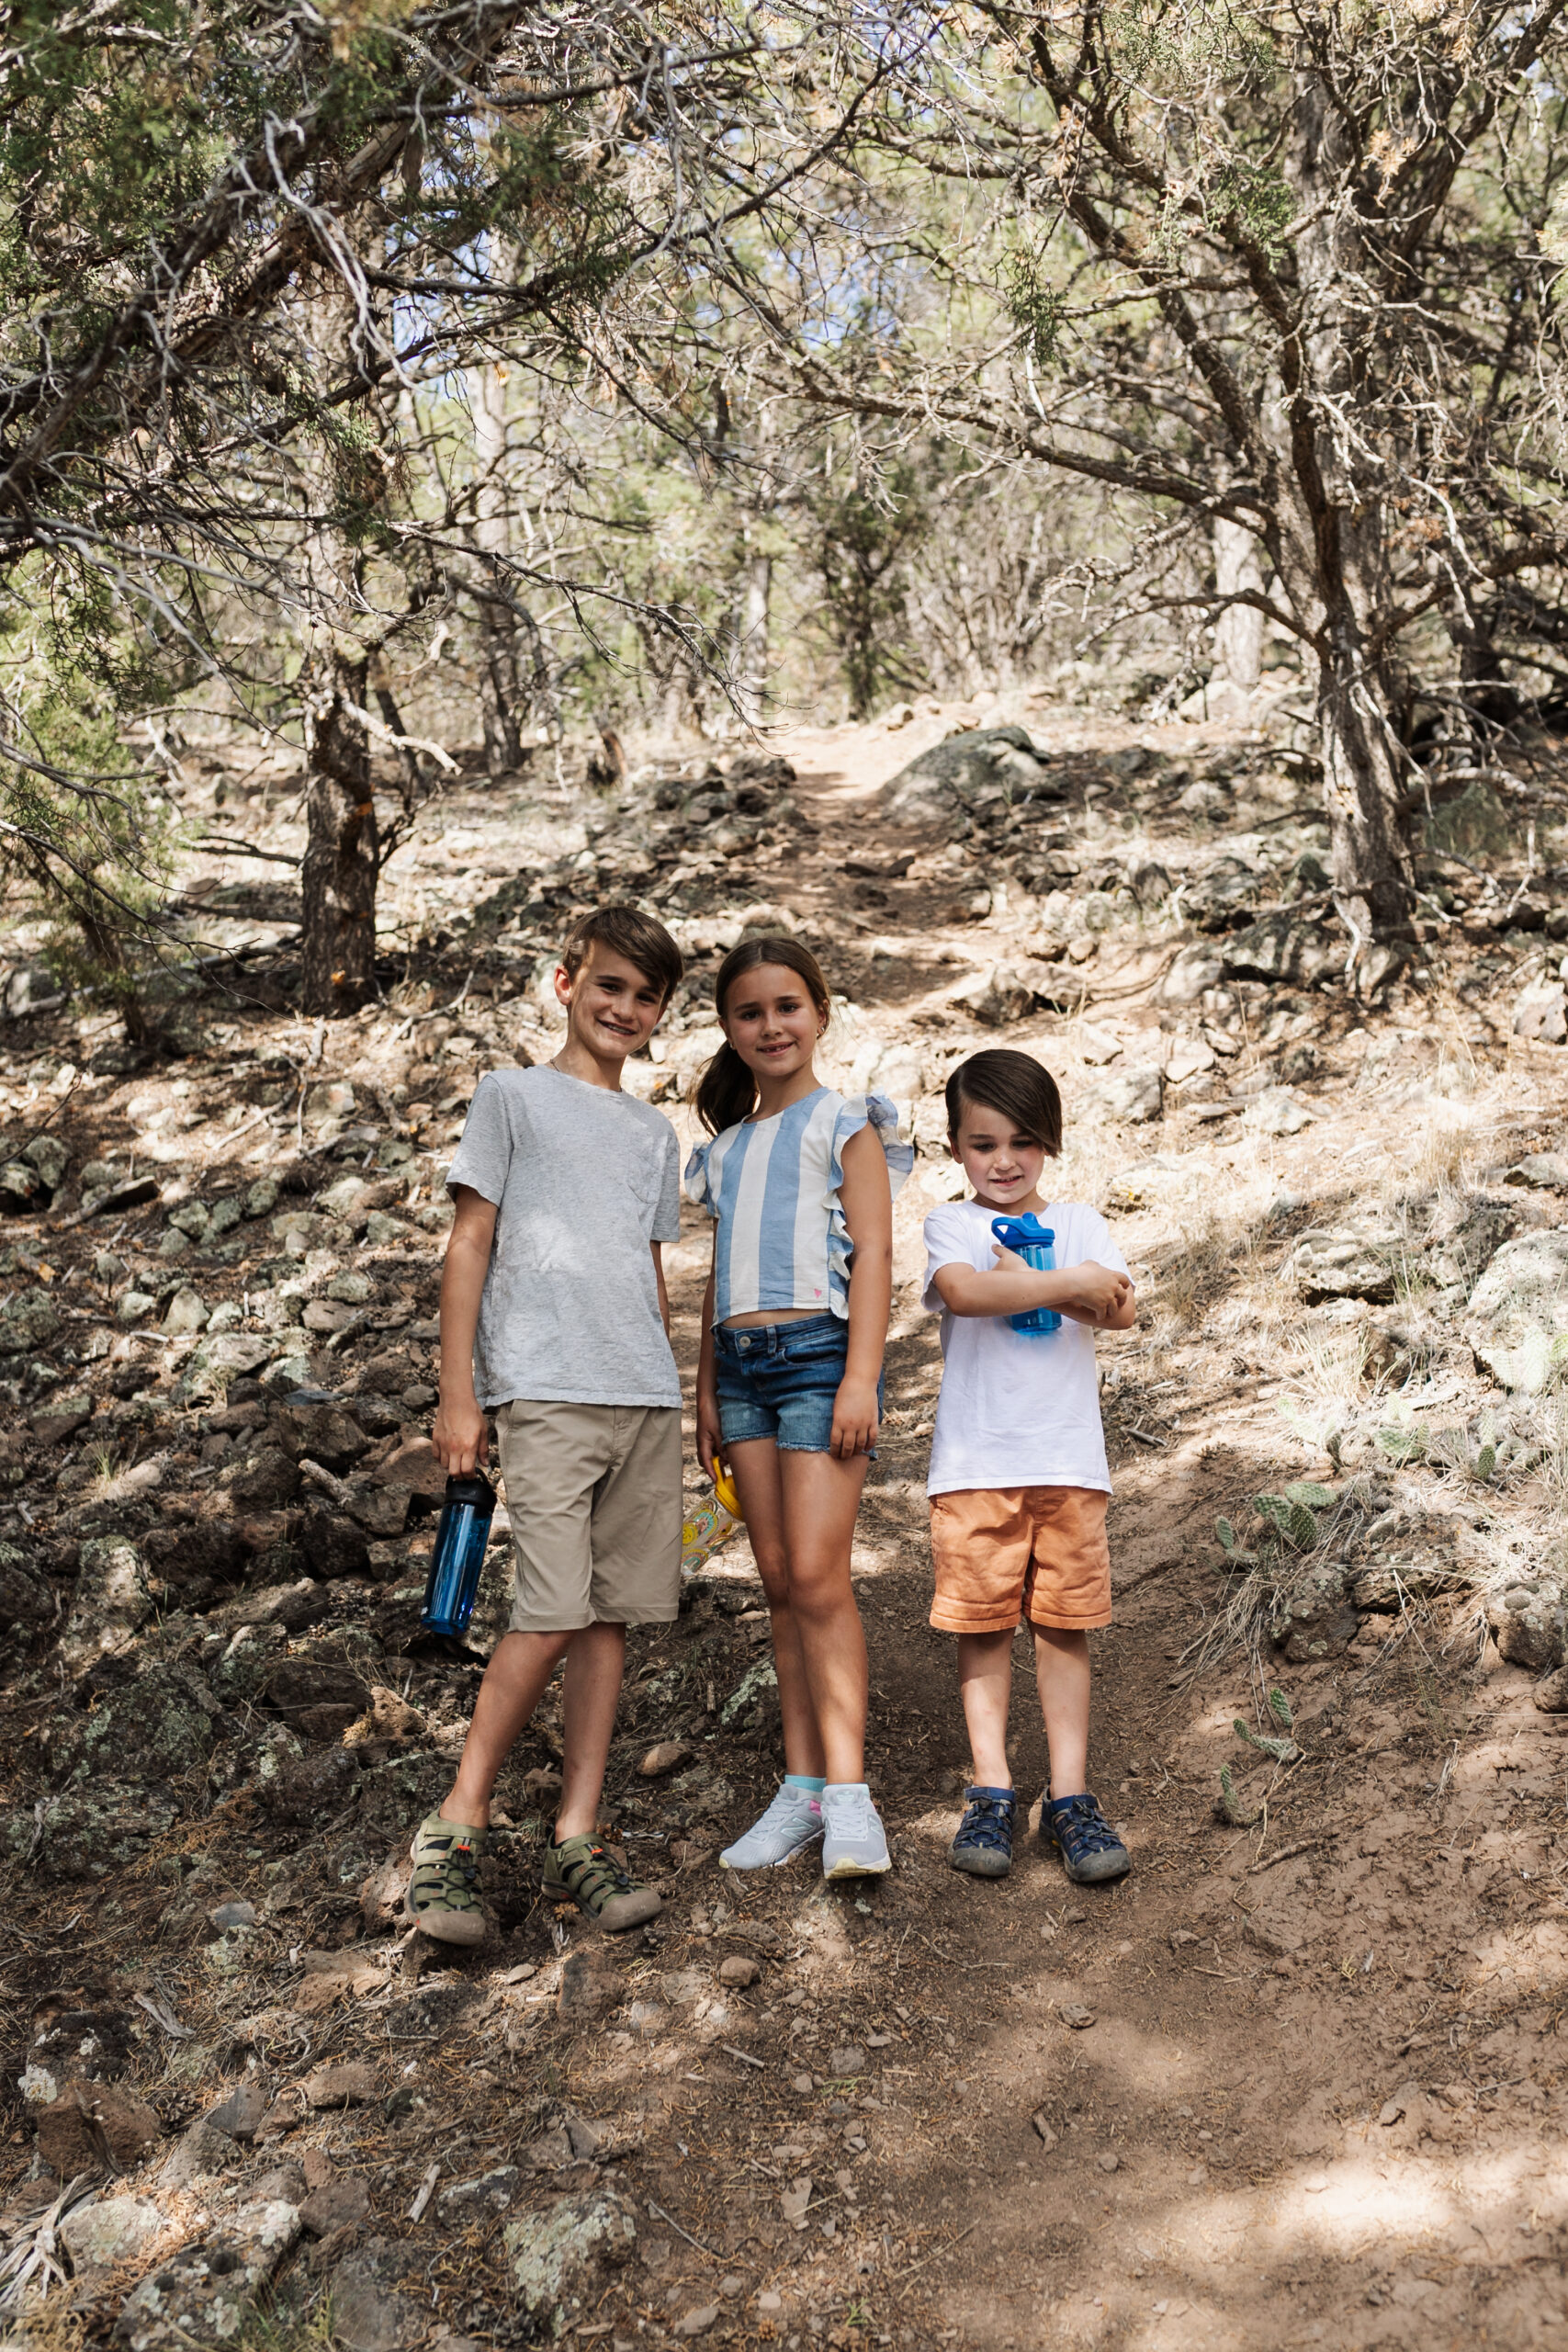 hiking at smuggler mountain, aspen, where there are many trails for kids of all ages and abilities. #smugglermountain #hikingwithkids #theldltravels